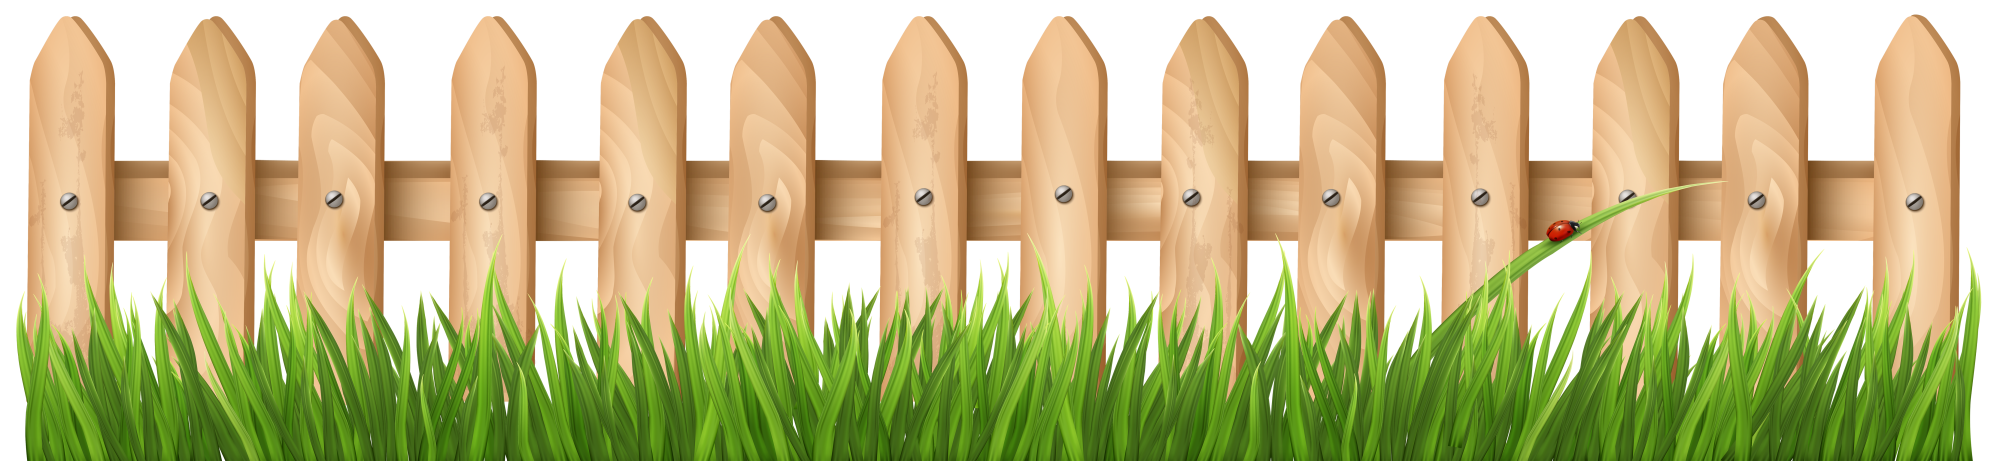 fence clipart fence repair